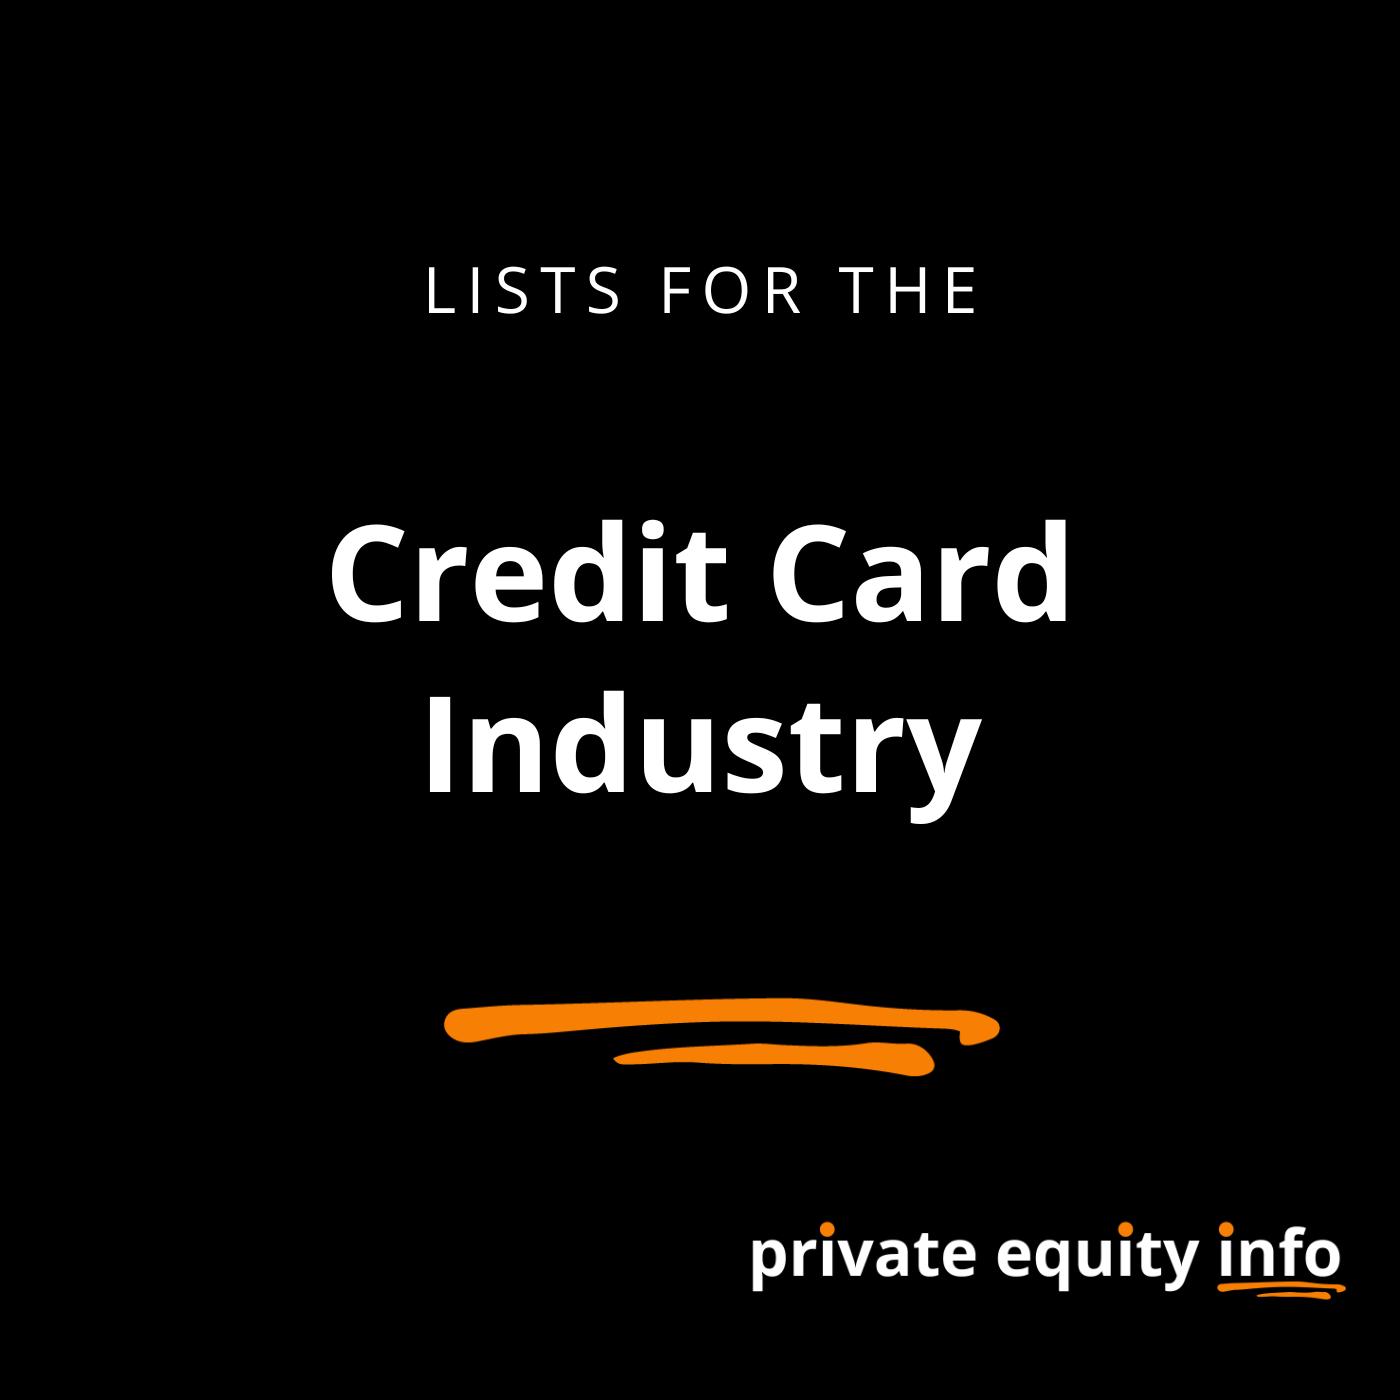 List of Private Equity Firms in the Credit Card industry